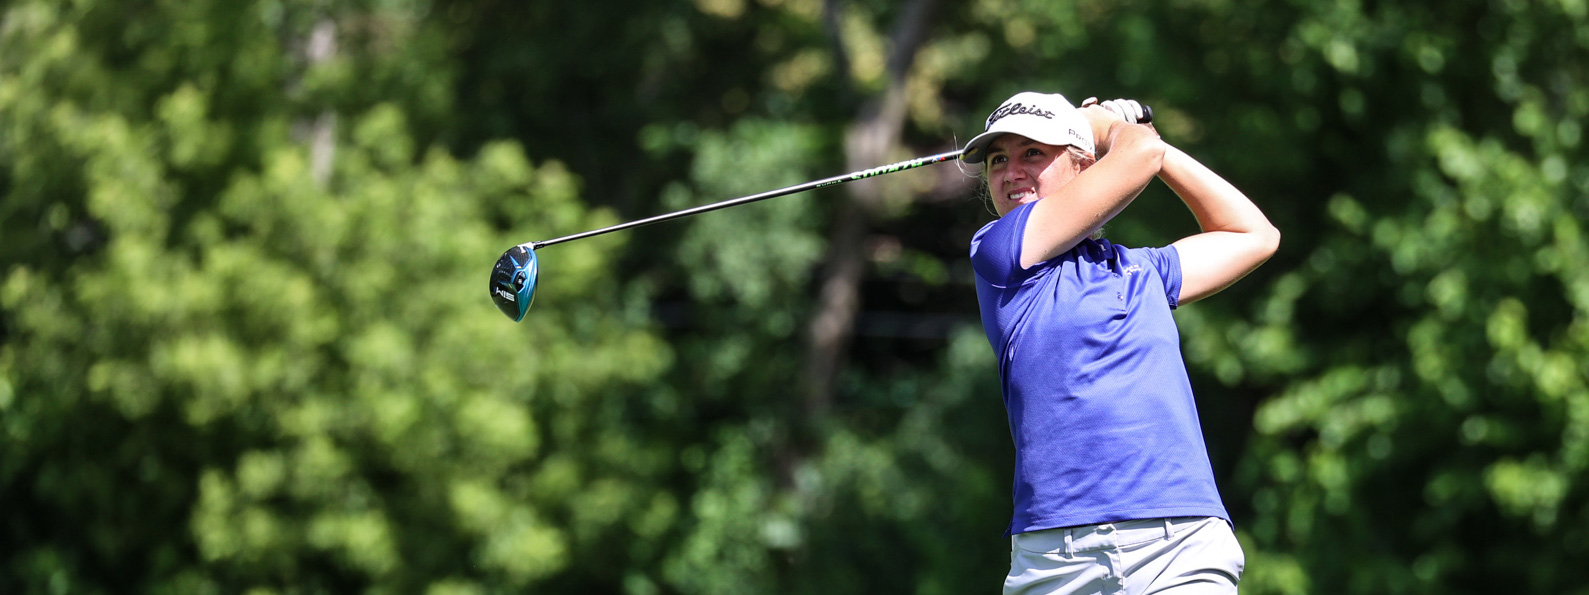 Vogler leads after solid opening round